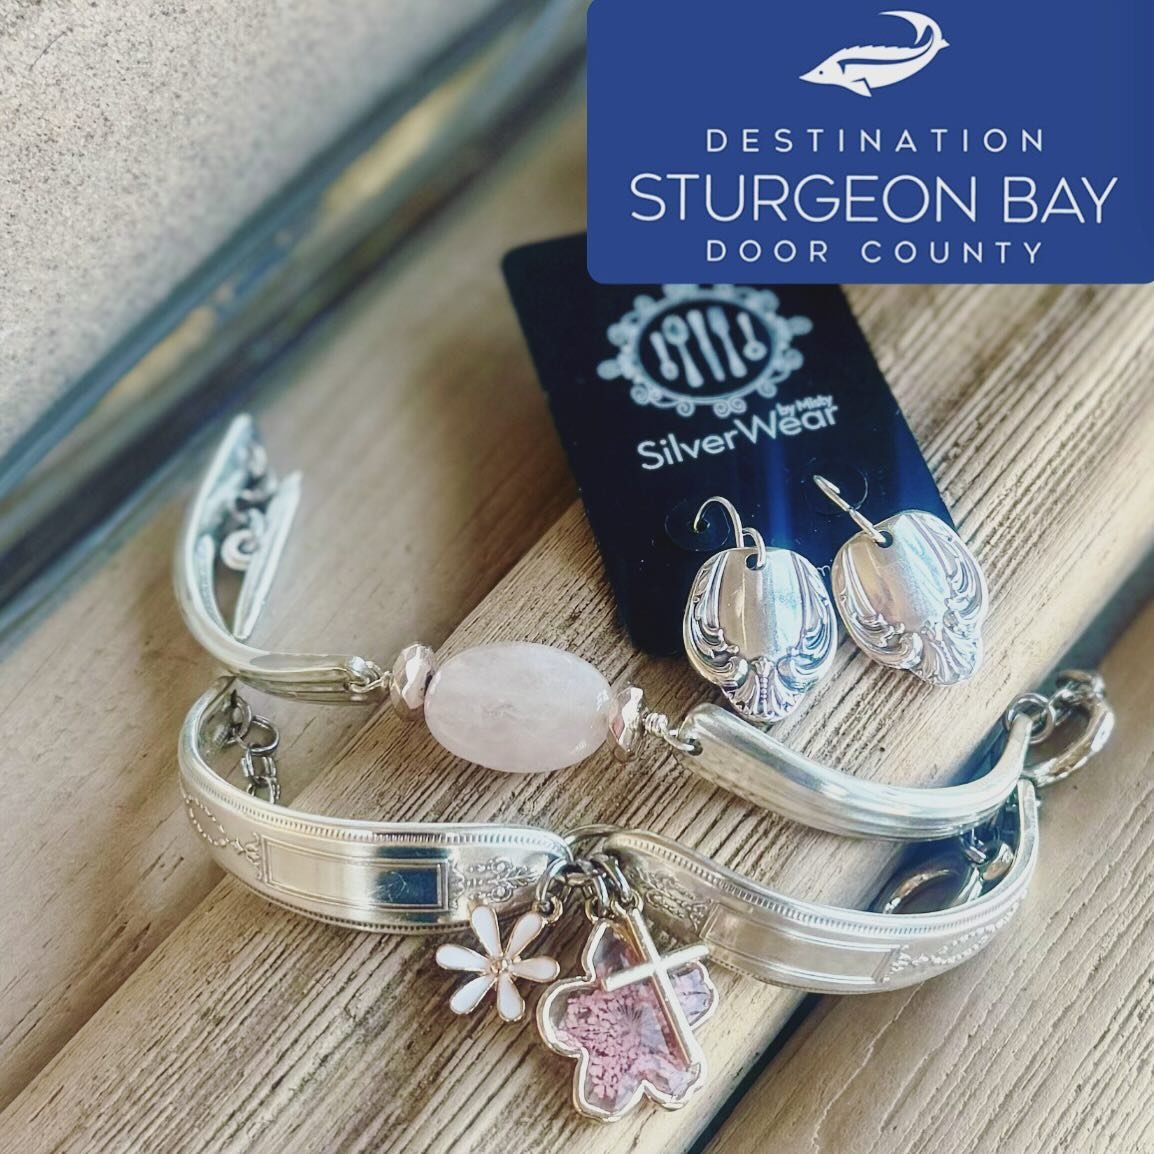 Next up&hellip;.

SilverWear by Misty is headed to Door County for Memorial Day weekend!

Jordy will be at Sturgeon Bay Fine Art Fair May 25th &amp; 26th!

#silverwearbymisty
#thefinaltour
#havejewelrywilltravel 
#doorcounty
#sturgeonbay
#fineartfair